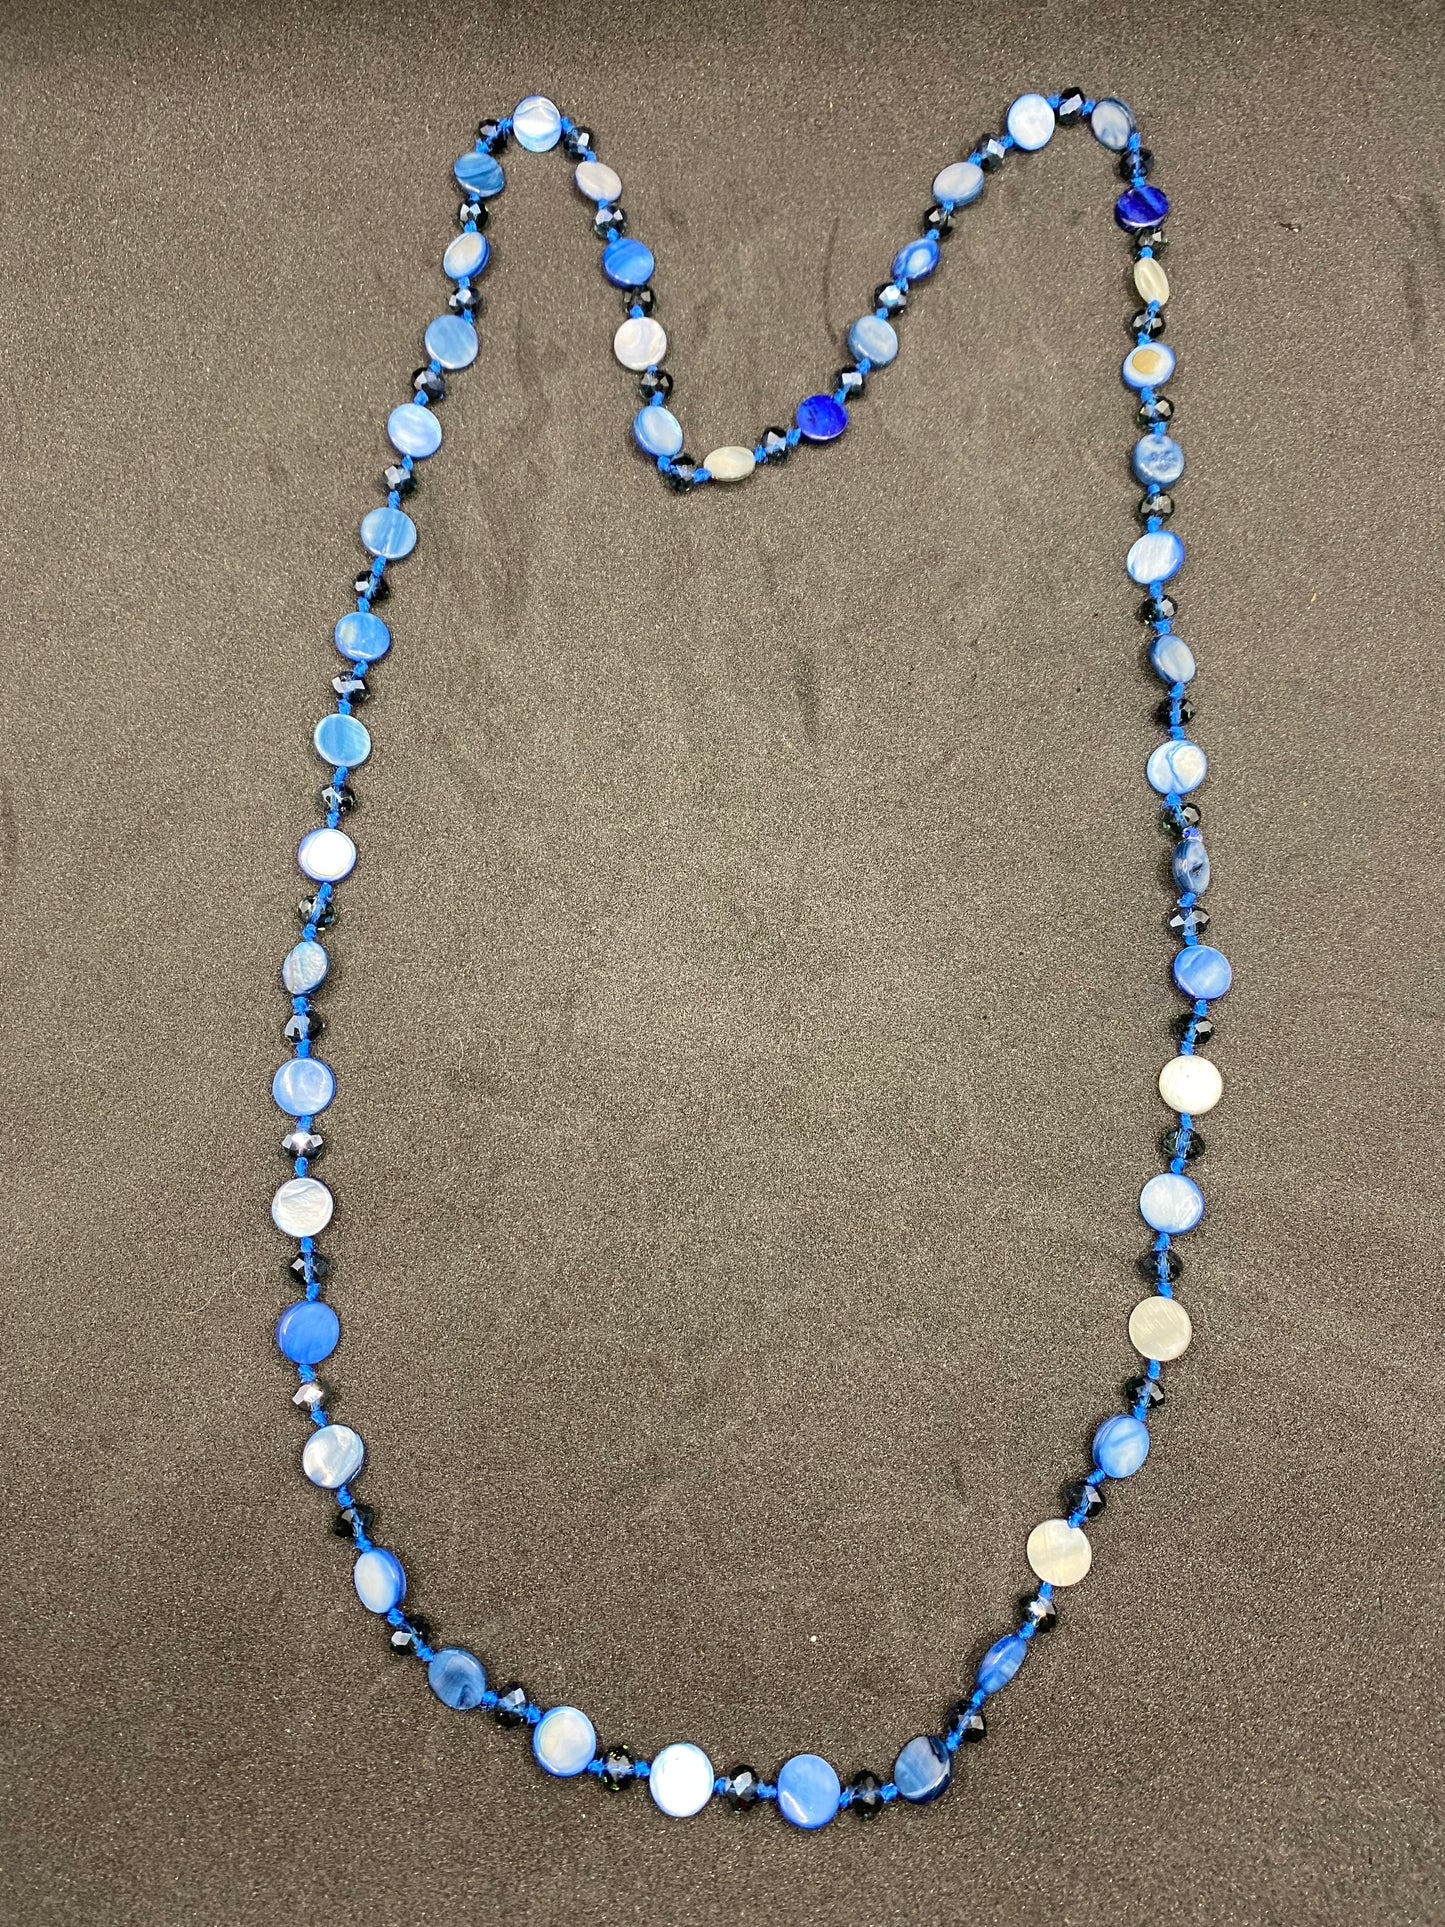 Blue glass bead long necklace